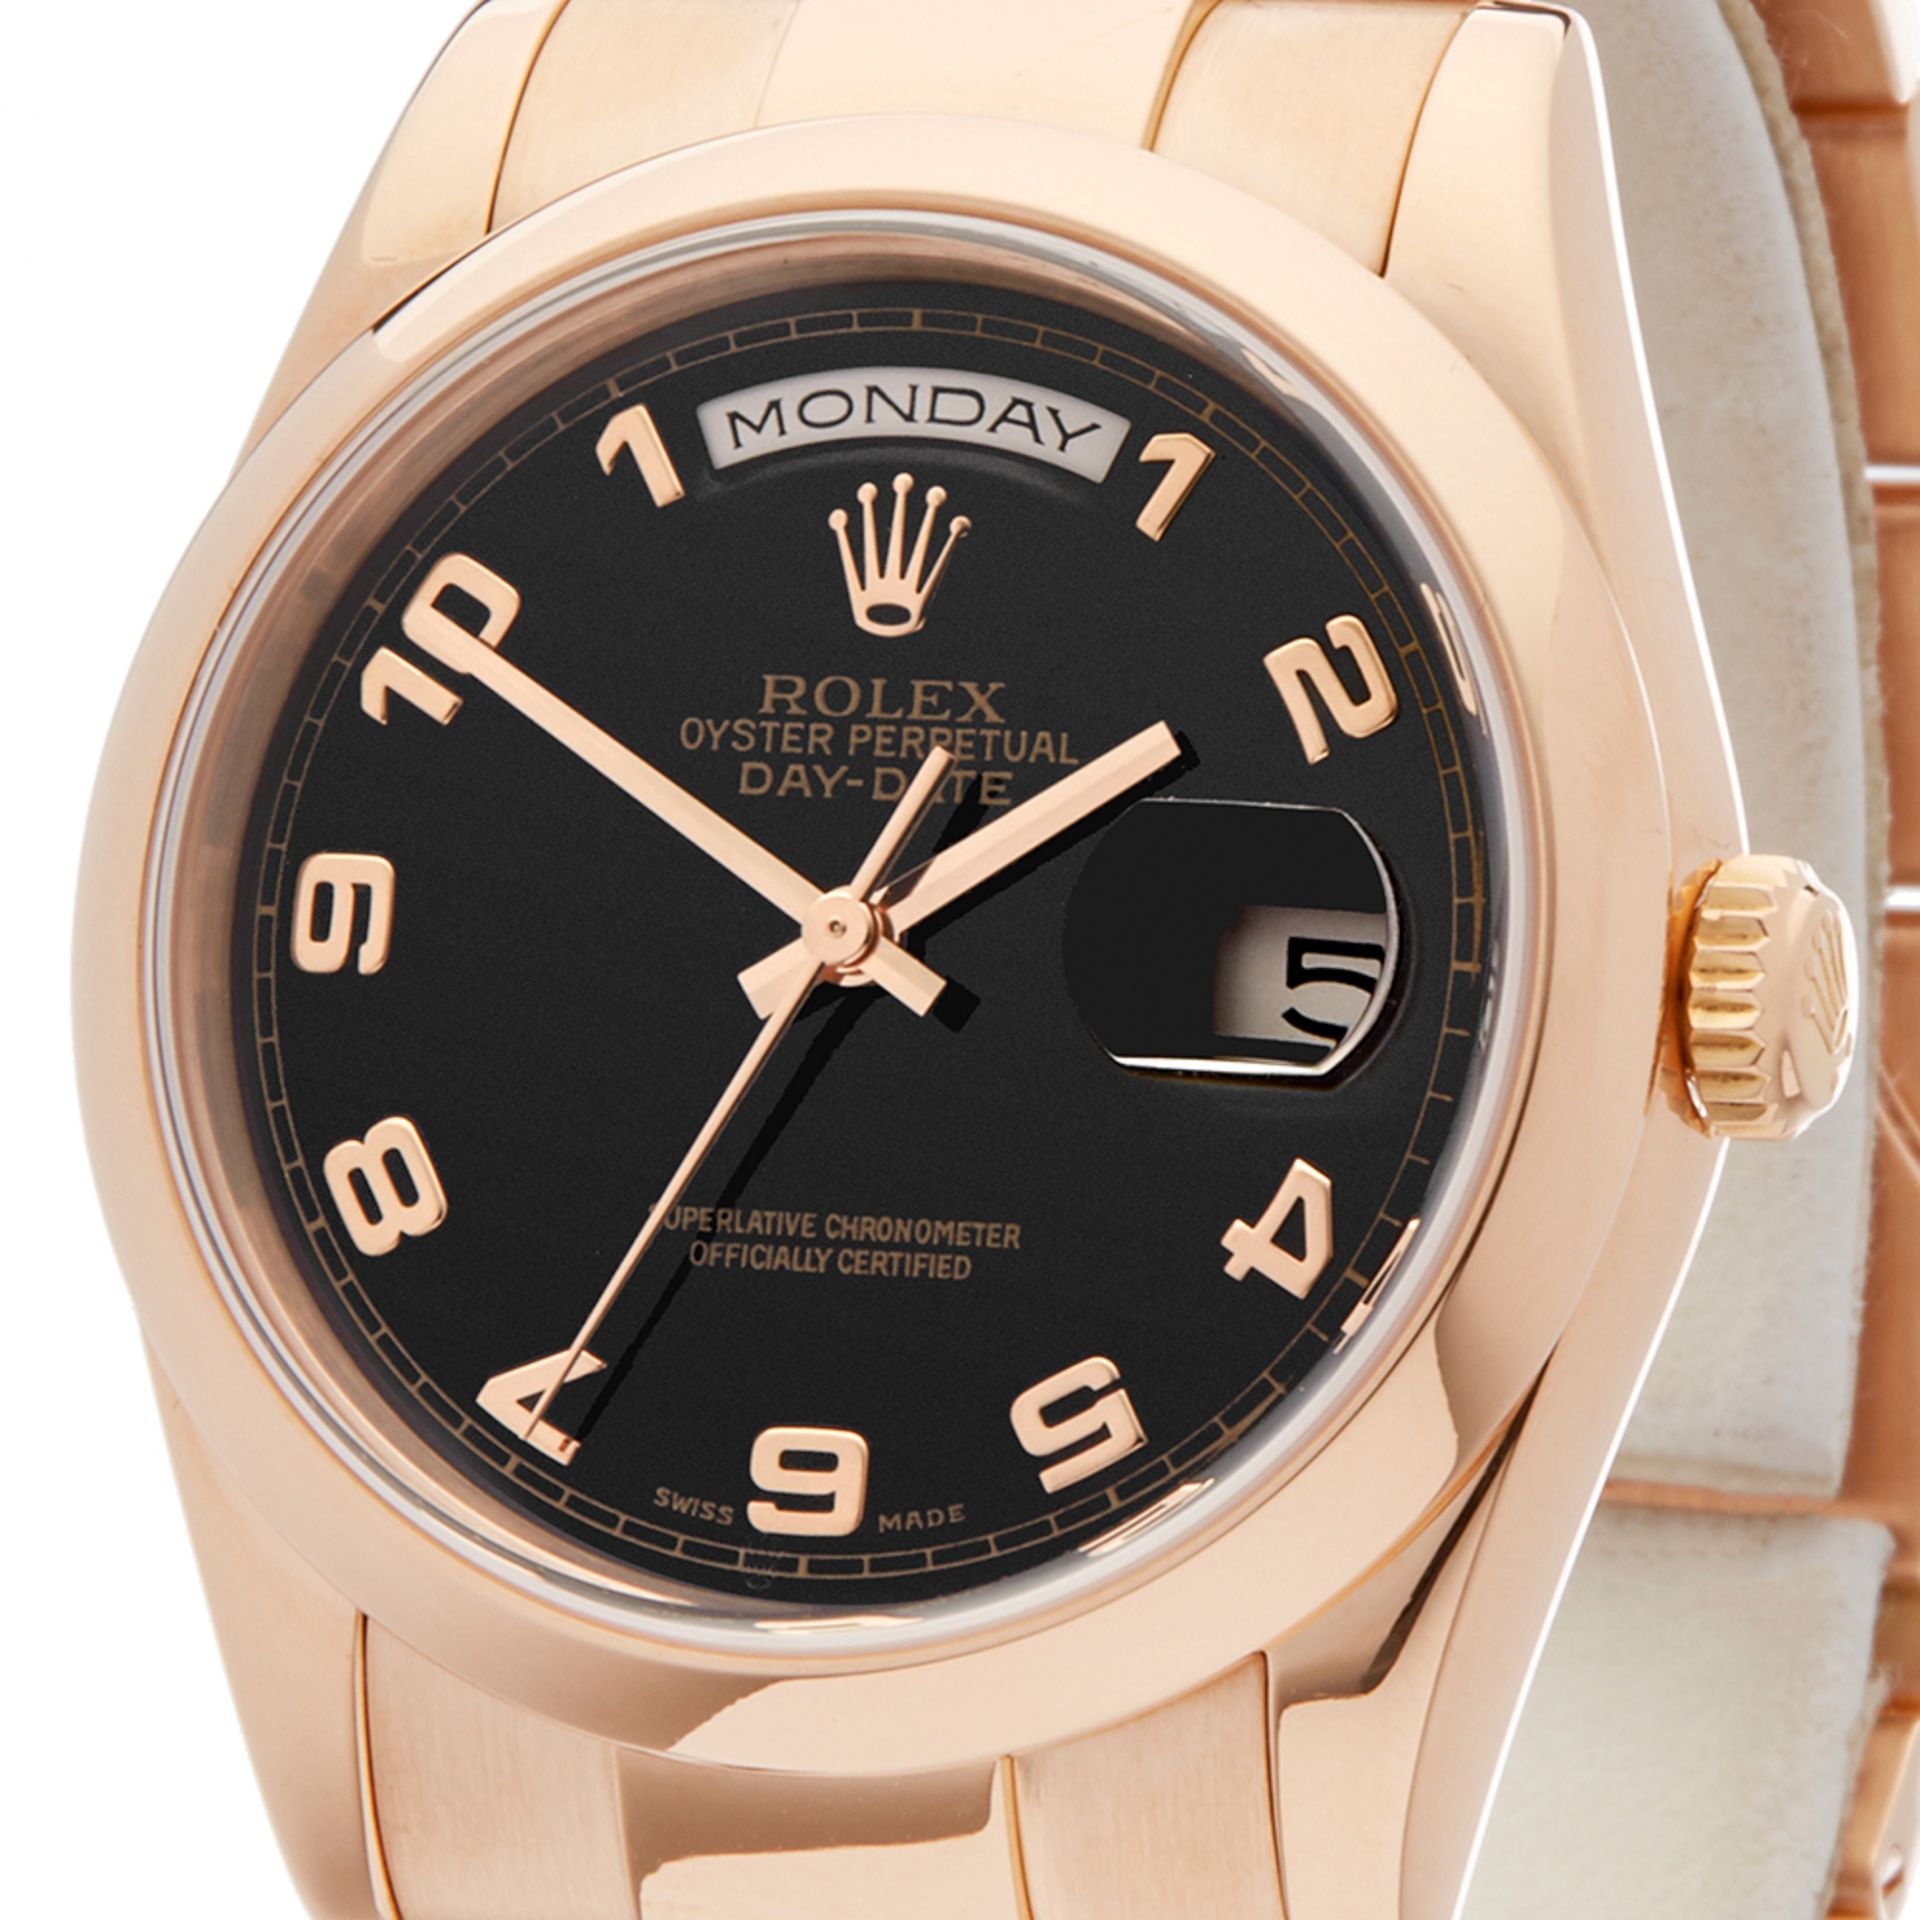 2002 Rolex Day-Date 36 18k Rose Gold - 118205 - Image 7 of 8